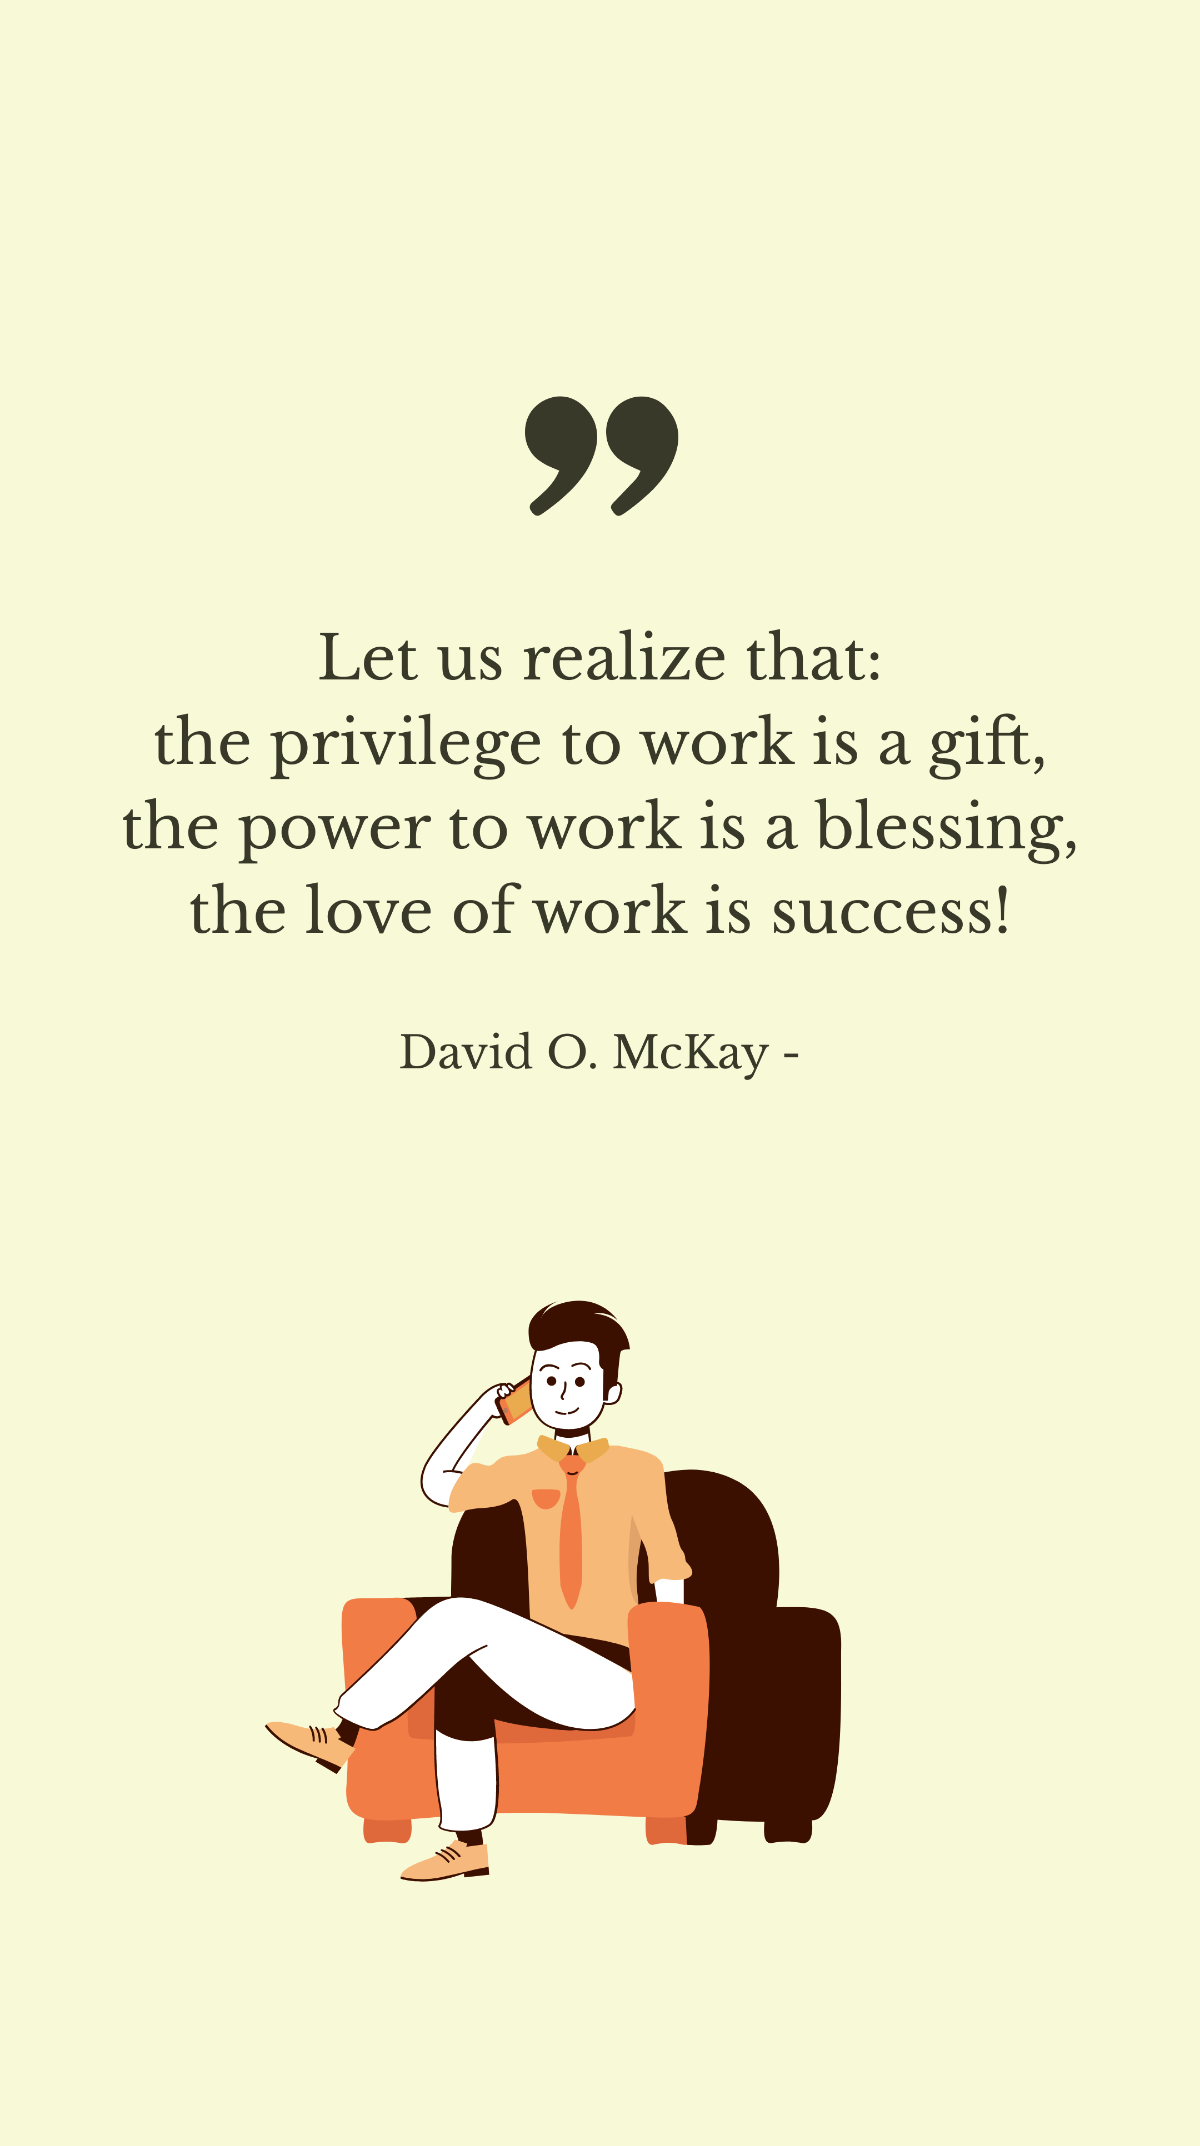 David O. McKay - Let us realize that: the privilege to work is a gift, the power to work is a blessing, the love of work is success!